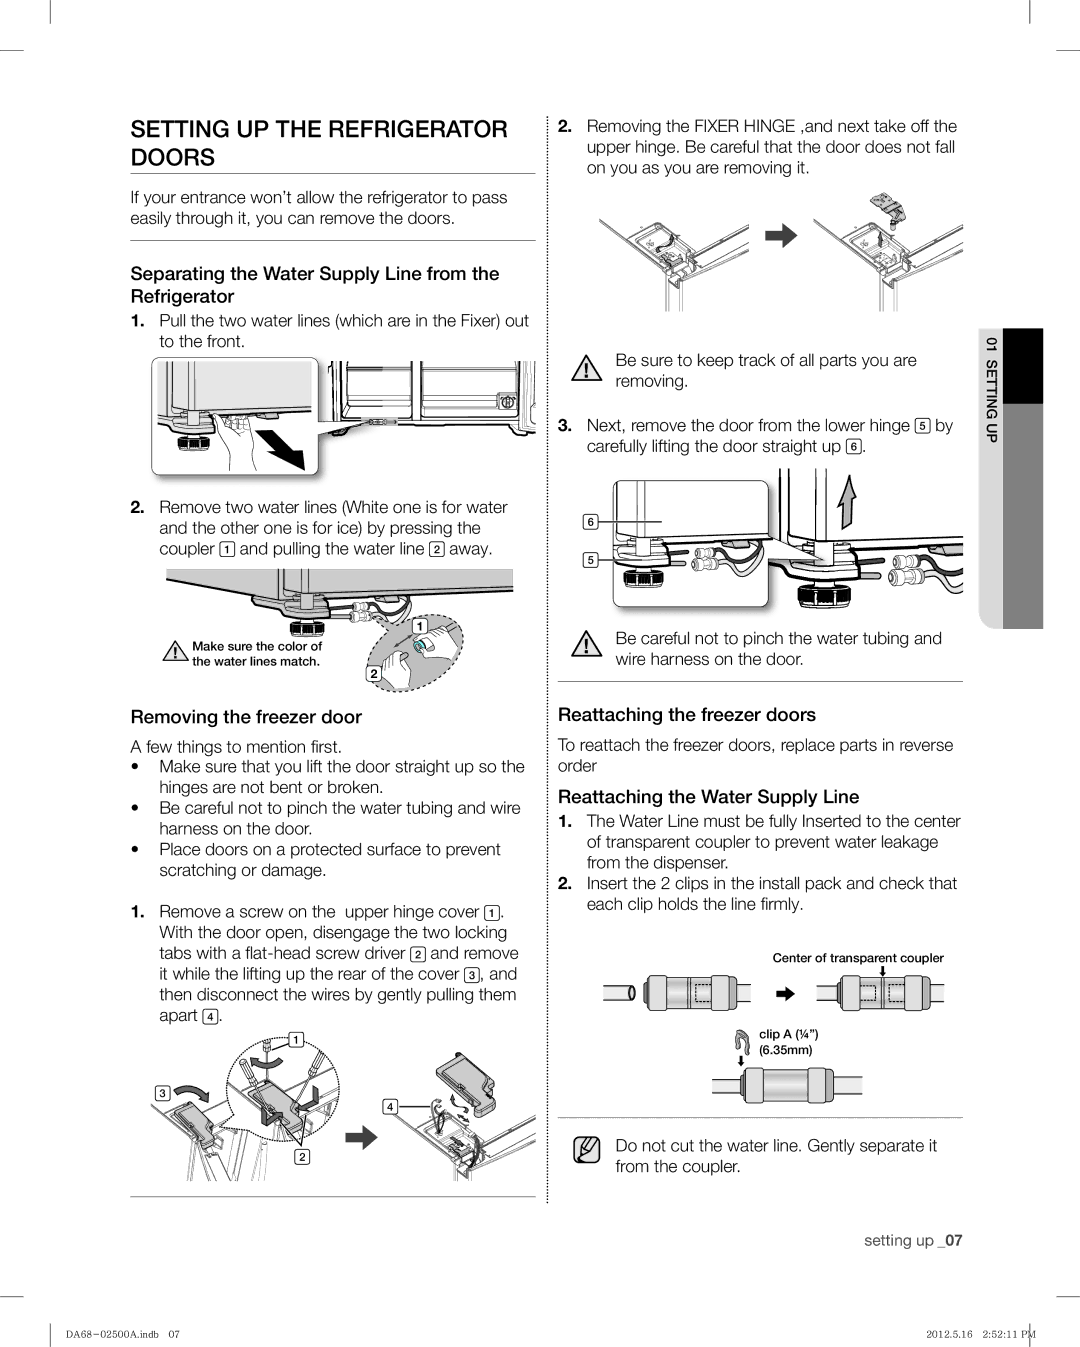 Samsung RSG307AAWP user manual Setting UP the Refrigerator Doors, Separating the Water Supply Line from the Refrigerator 